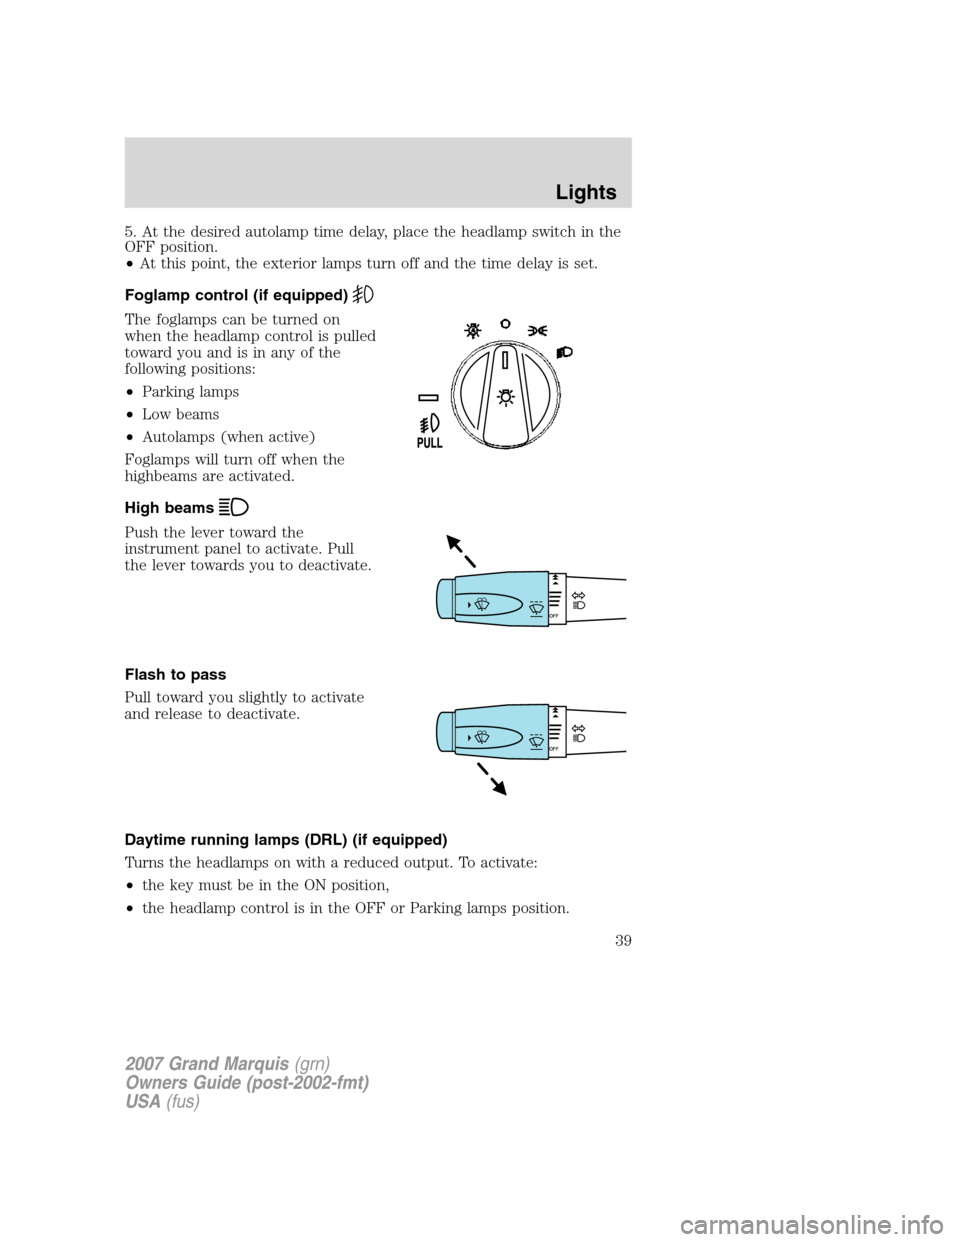 Mercury Grand Marquis 2007  s Owners Guide 5. At the desired autolamp time delay, place the headlamp switch in the
OFF position.
•At this point, the exterior lamps turn off and the time delay is set.
Foglamp control (if equipped)
The foglamp